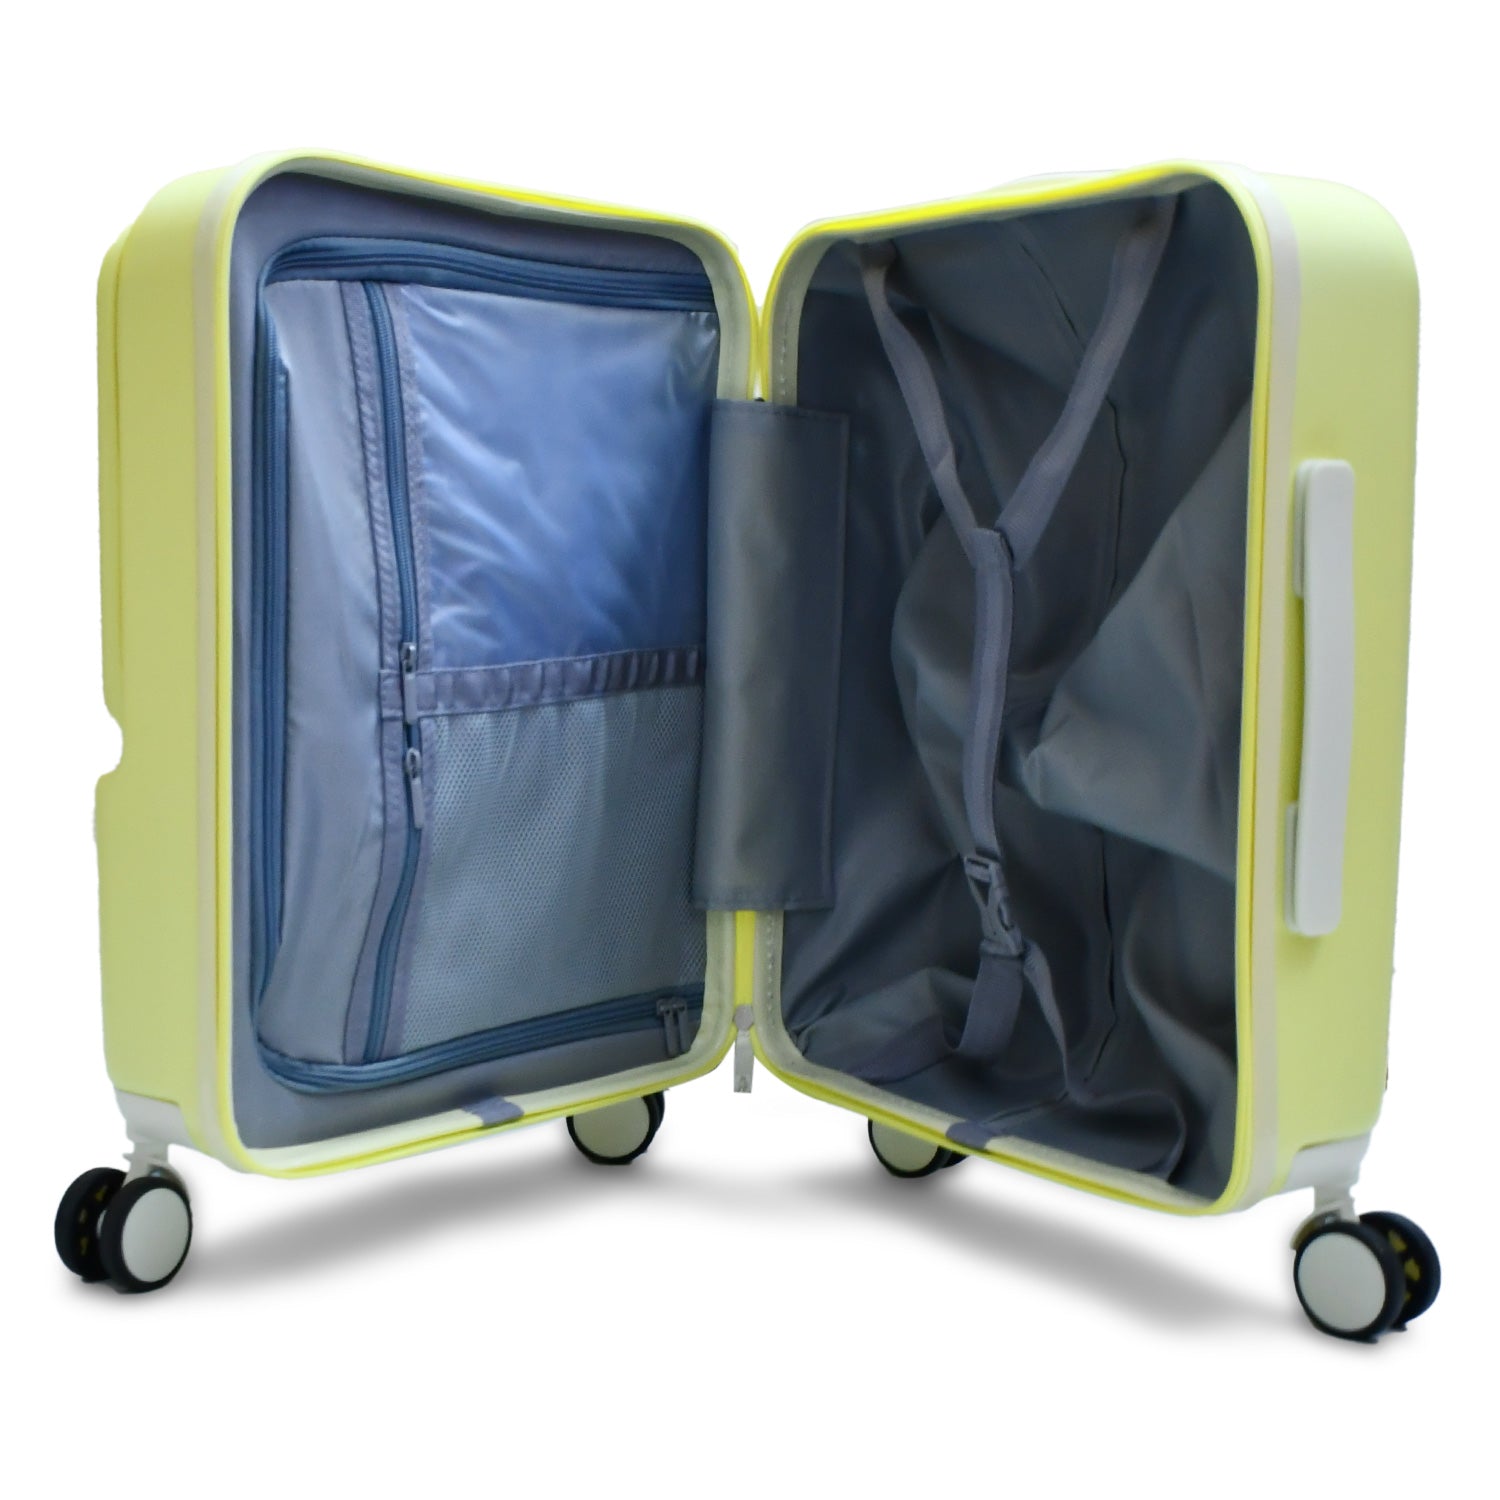 InnovateCarry Pro 20"  Laptop Cabin Luggage ABS&PC